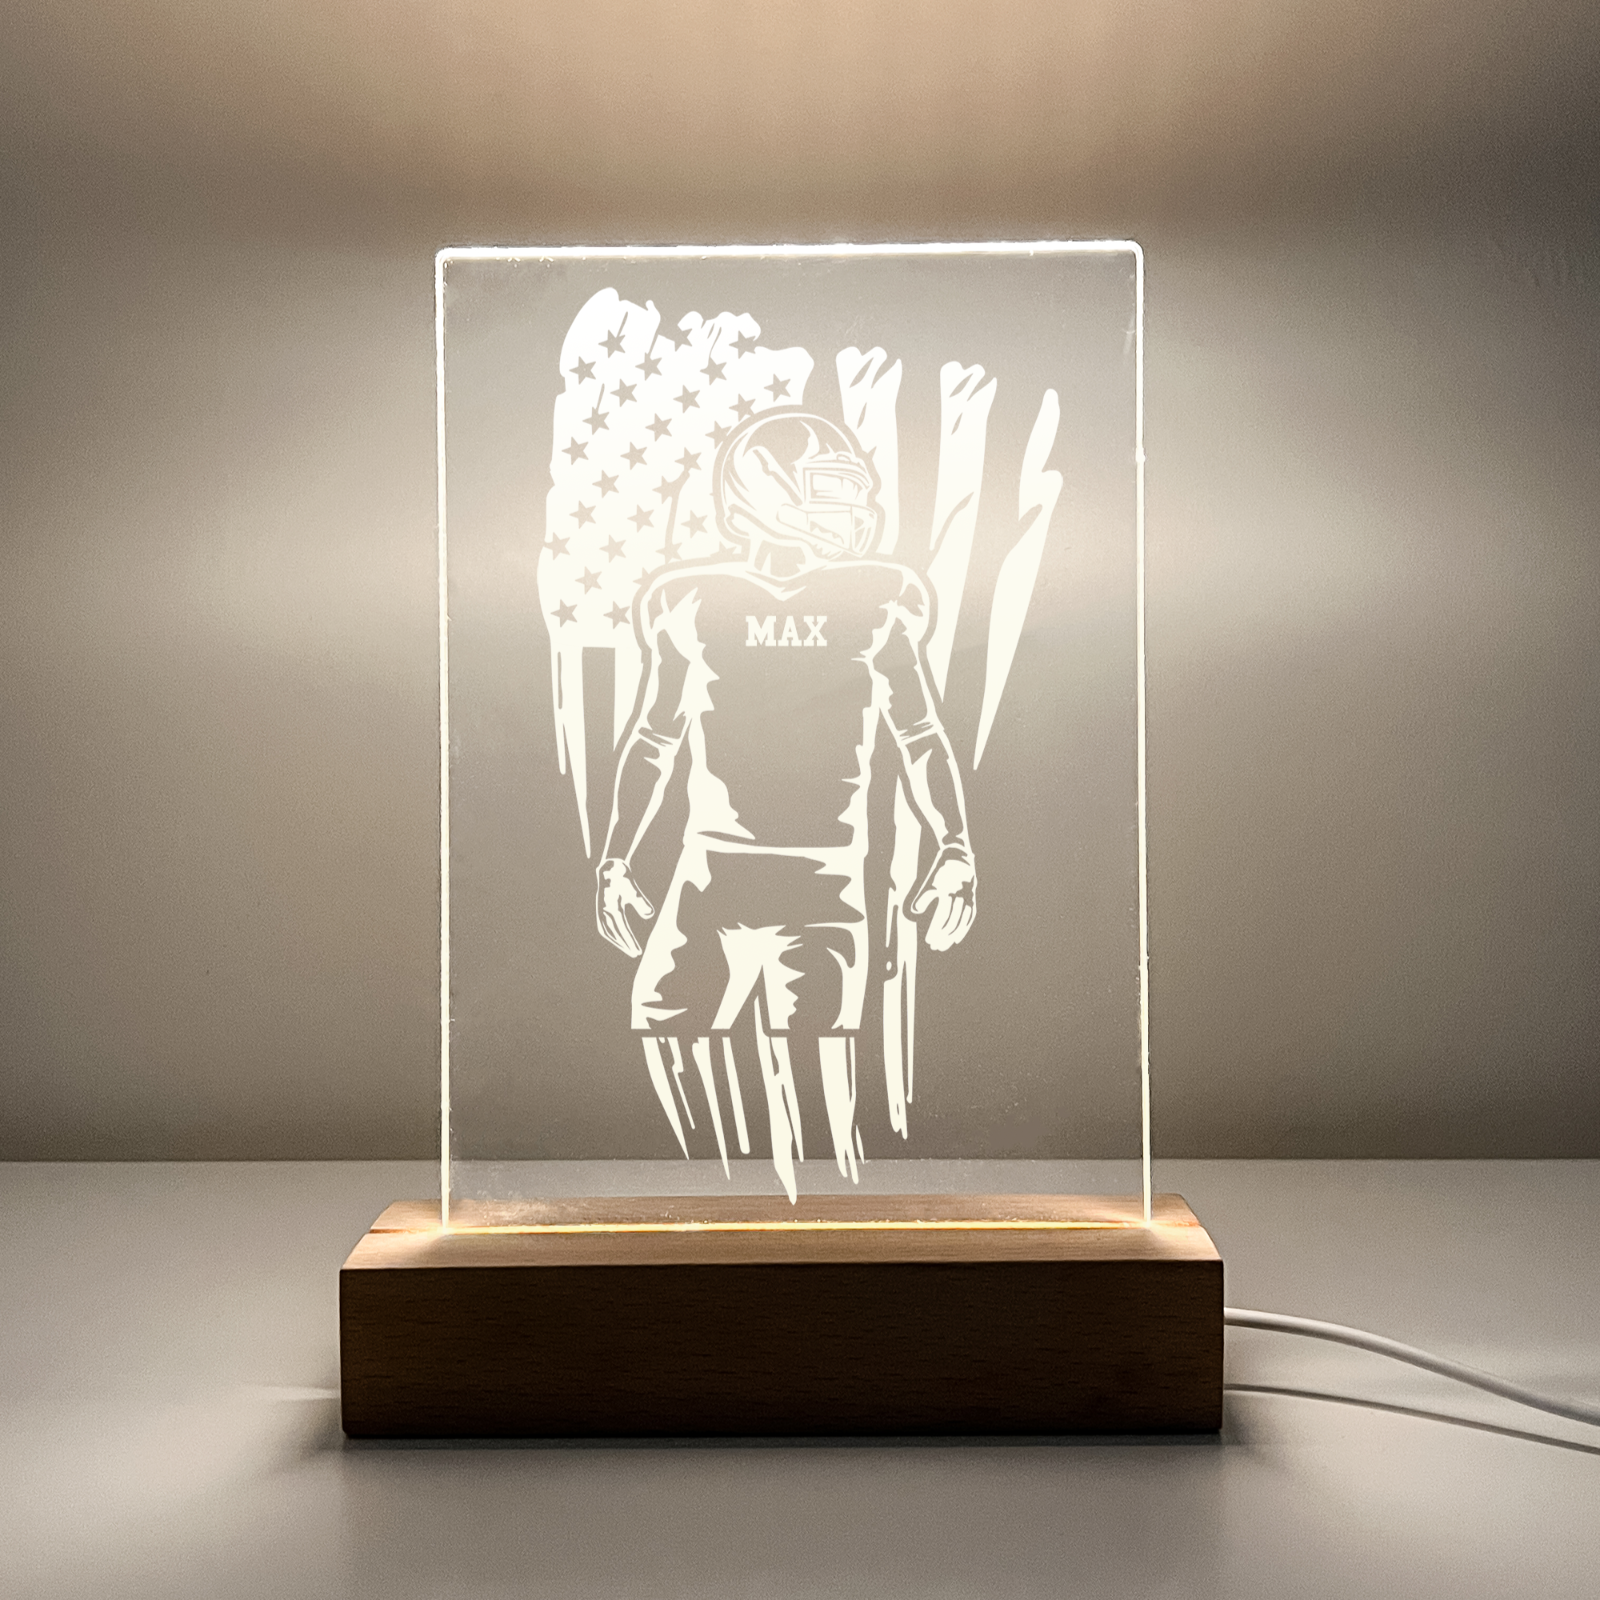 Personalized LED Light Up Desk Lamp Wood Stand USA Football Athlete Warner Gift